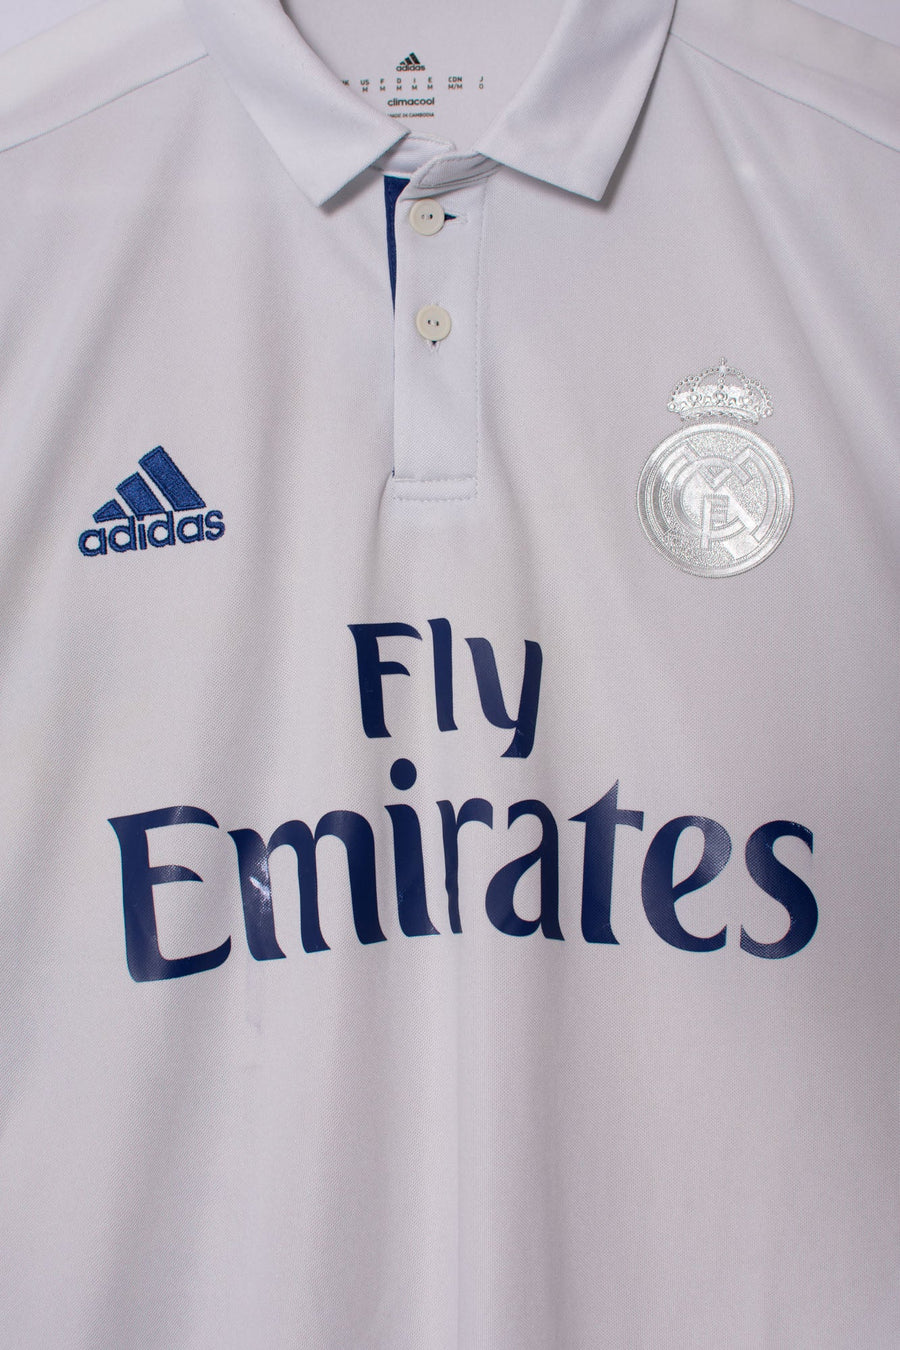 Real Madrid Adidas Official Football Silver Shield 2016/2017 Jersey